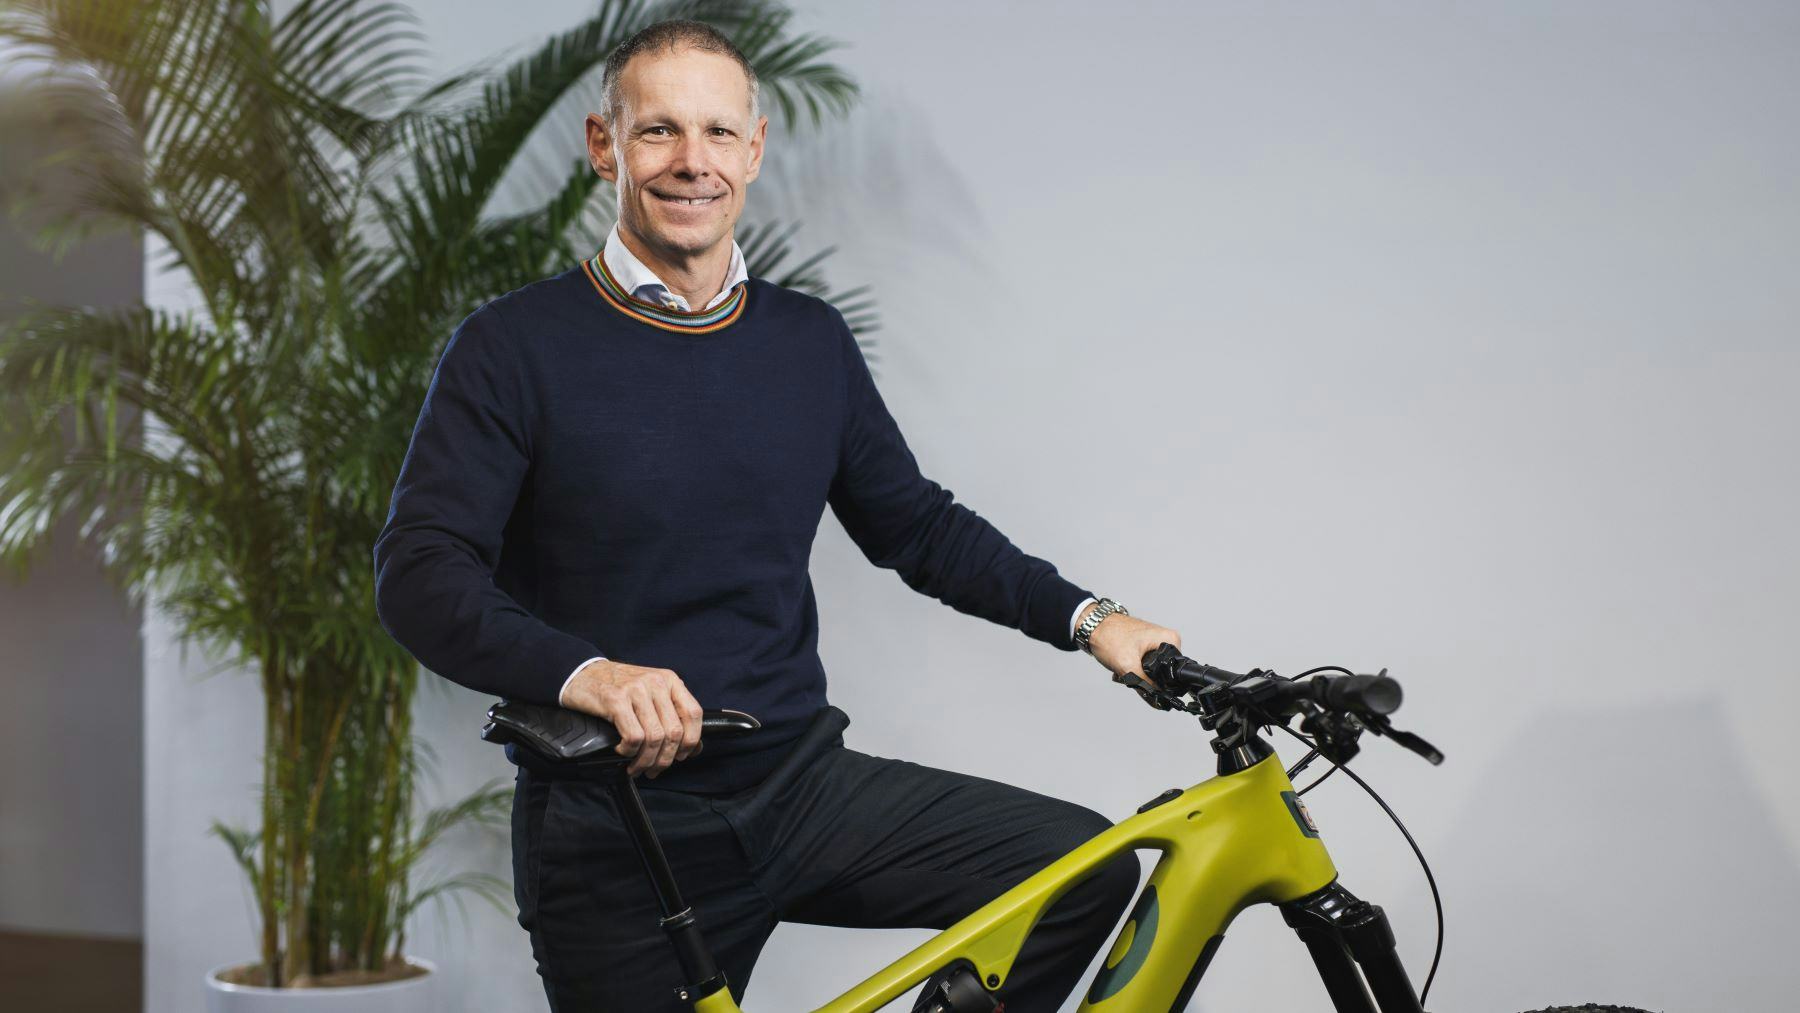 Moving in early 2023 from German Cycle Union to Swiss SEMG, CEO Frank-Simon Aeschbacher is guiding M-Way’s expansion into Germany. – Photo M-Way